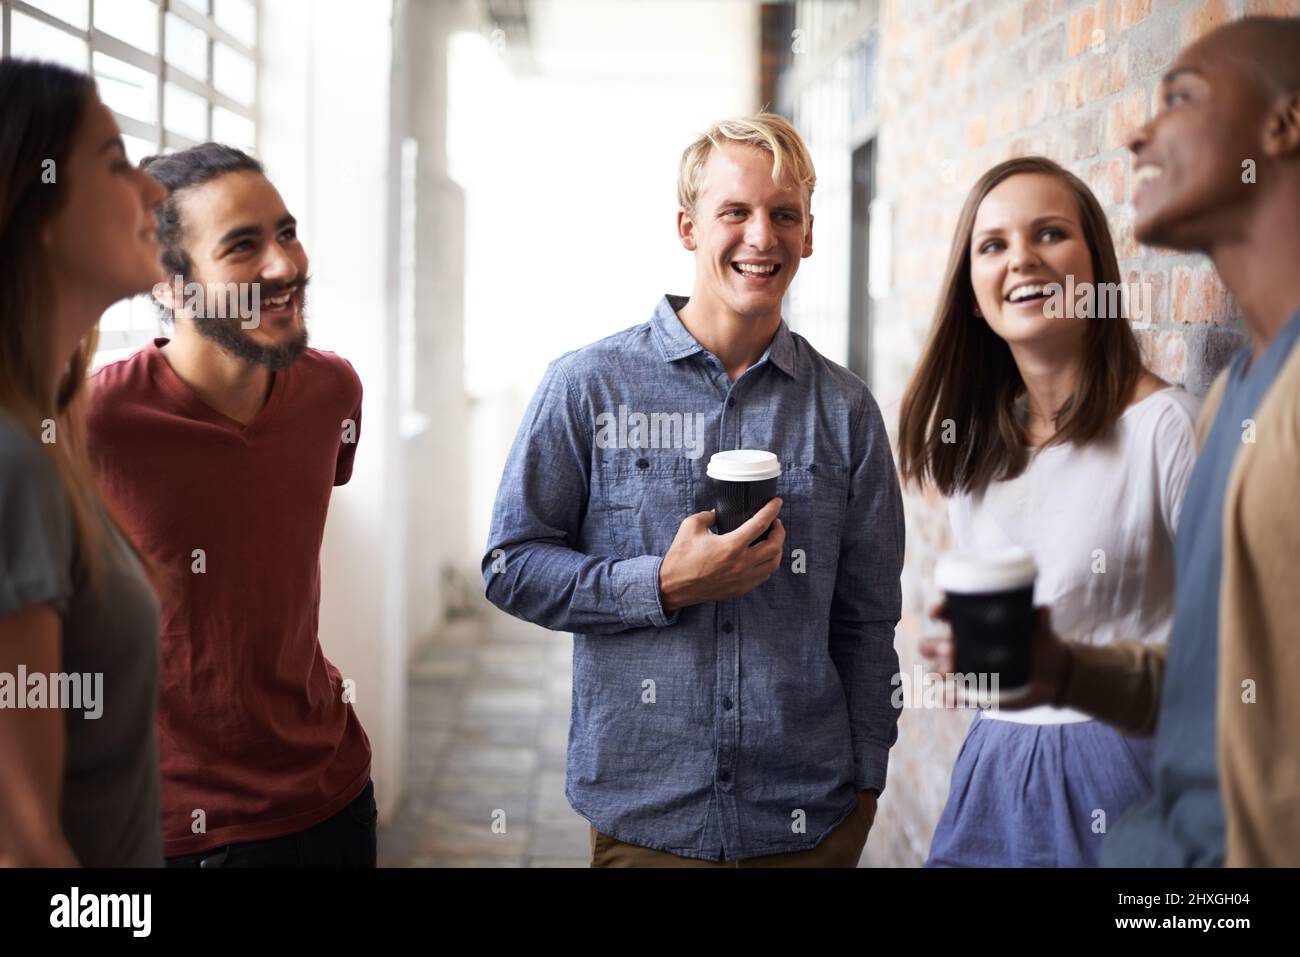 Lighthearted discussion with classmates. Shot of a diverse group of university friends talking in a hallway. Stock Photo